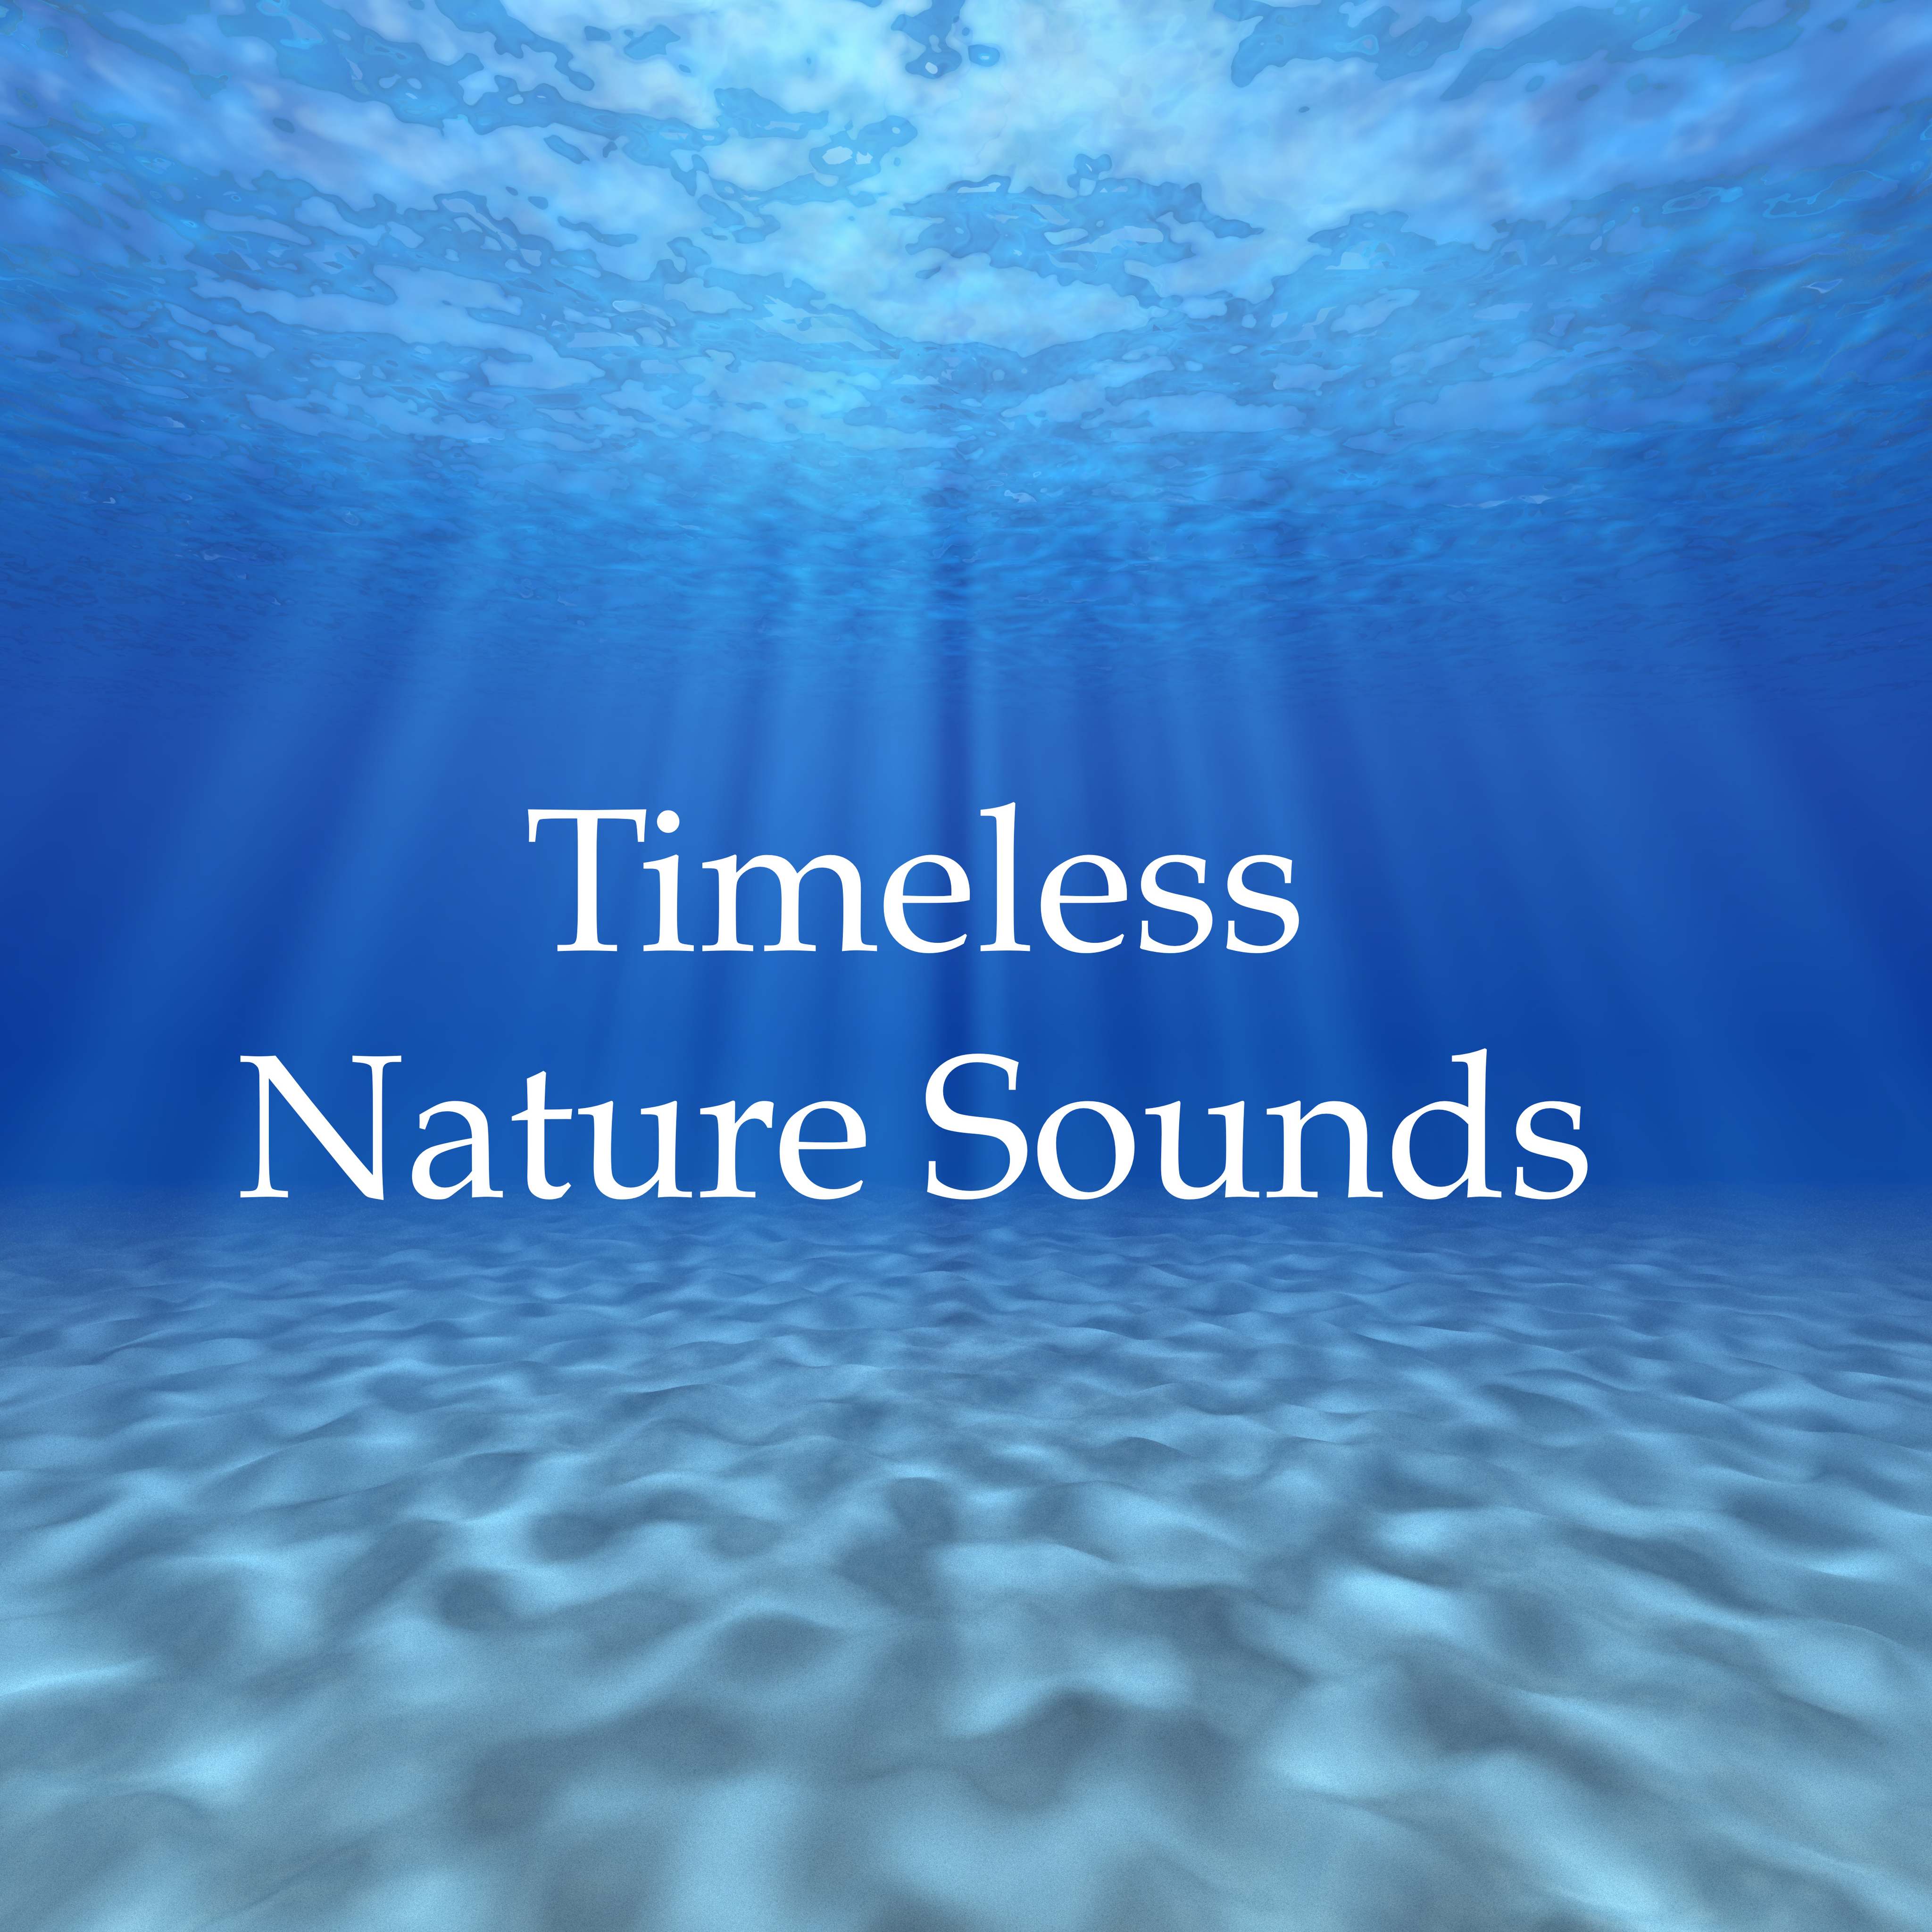 Timeless Nature Sounds - 20 Soothing Rain, Ocean and Water Melodies for Beating Stress & Anxiety, Relaxation, Meditation, Deep Focus and Better Sleep